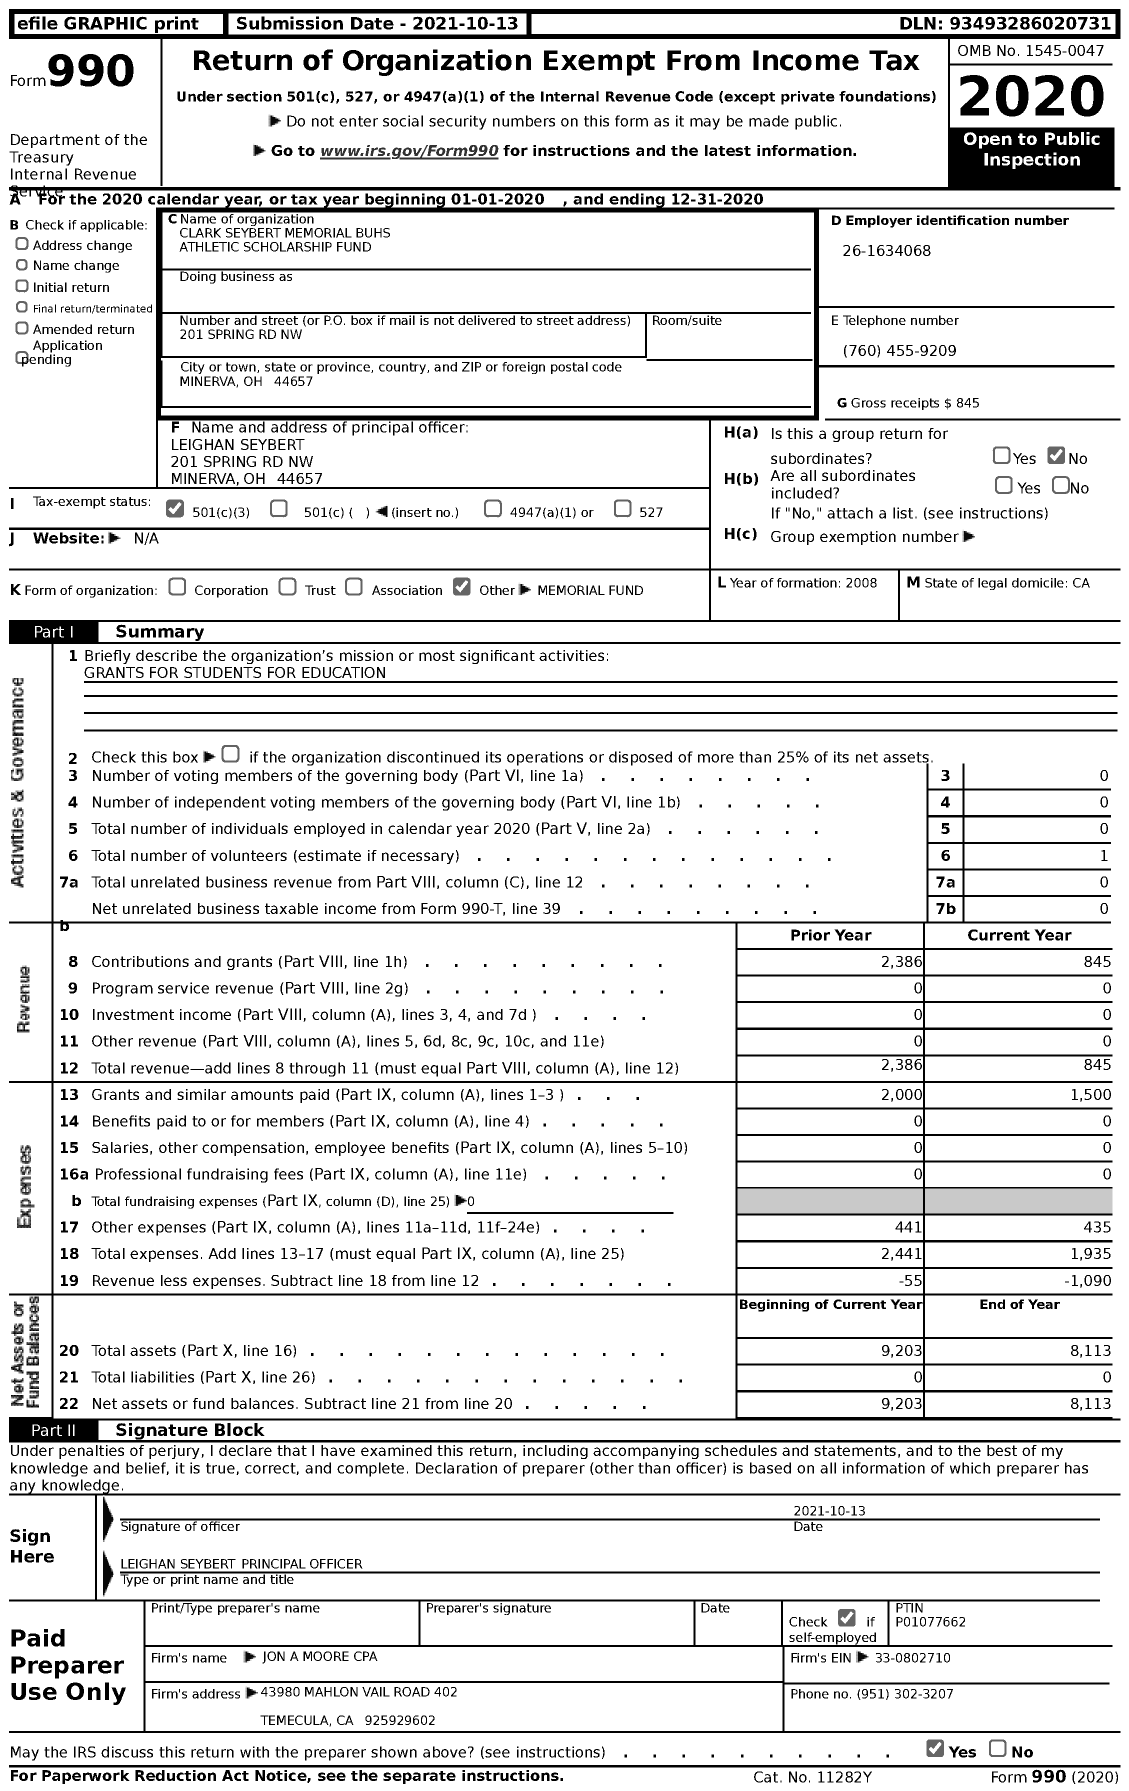 Image of first page of 2020 Form 990 for Clark Seybert Memorial Buhs Athletic Scholarship Fund